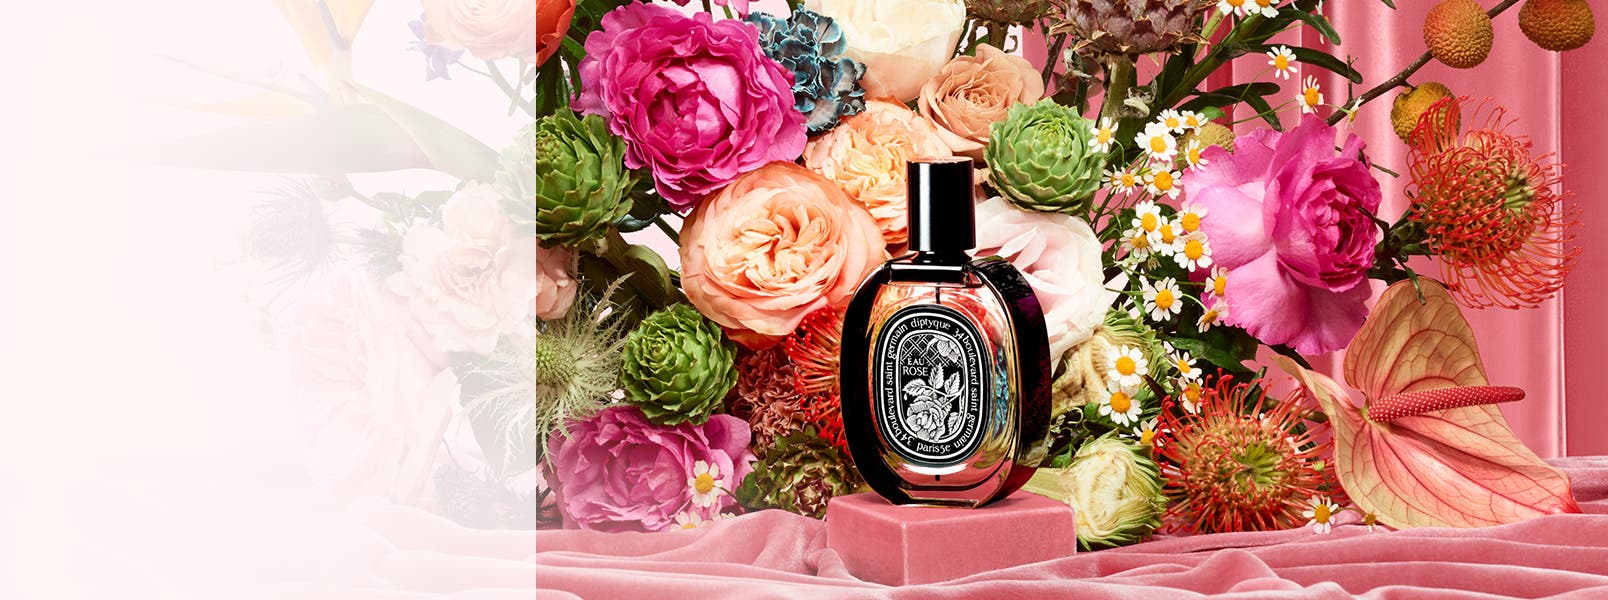 diptyque's new Eau Rose collection of fragrance and candles amid an exuberant floral display.